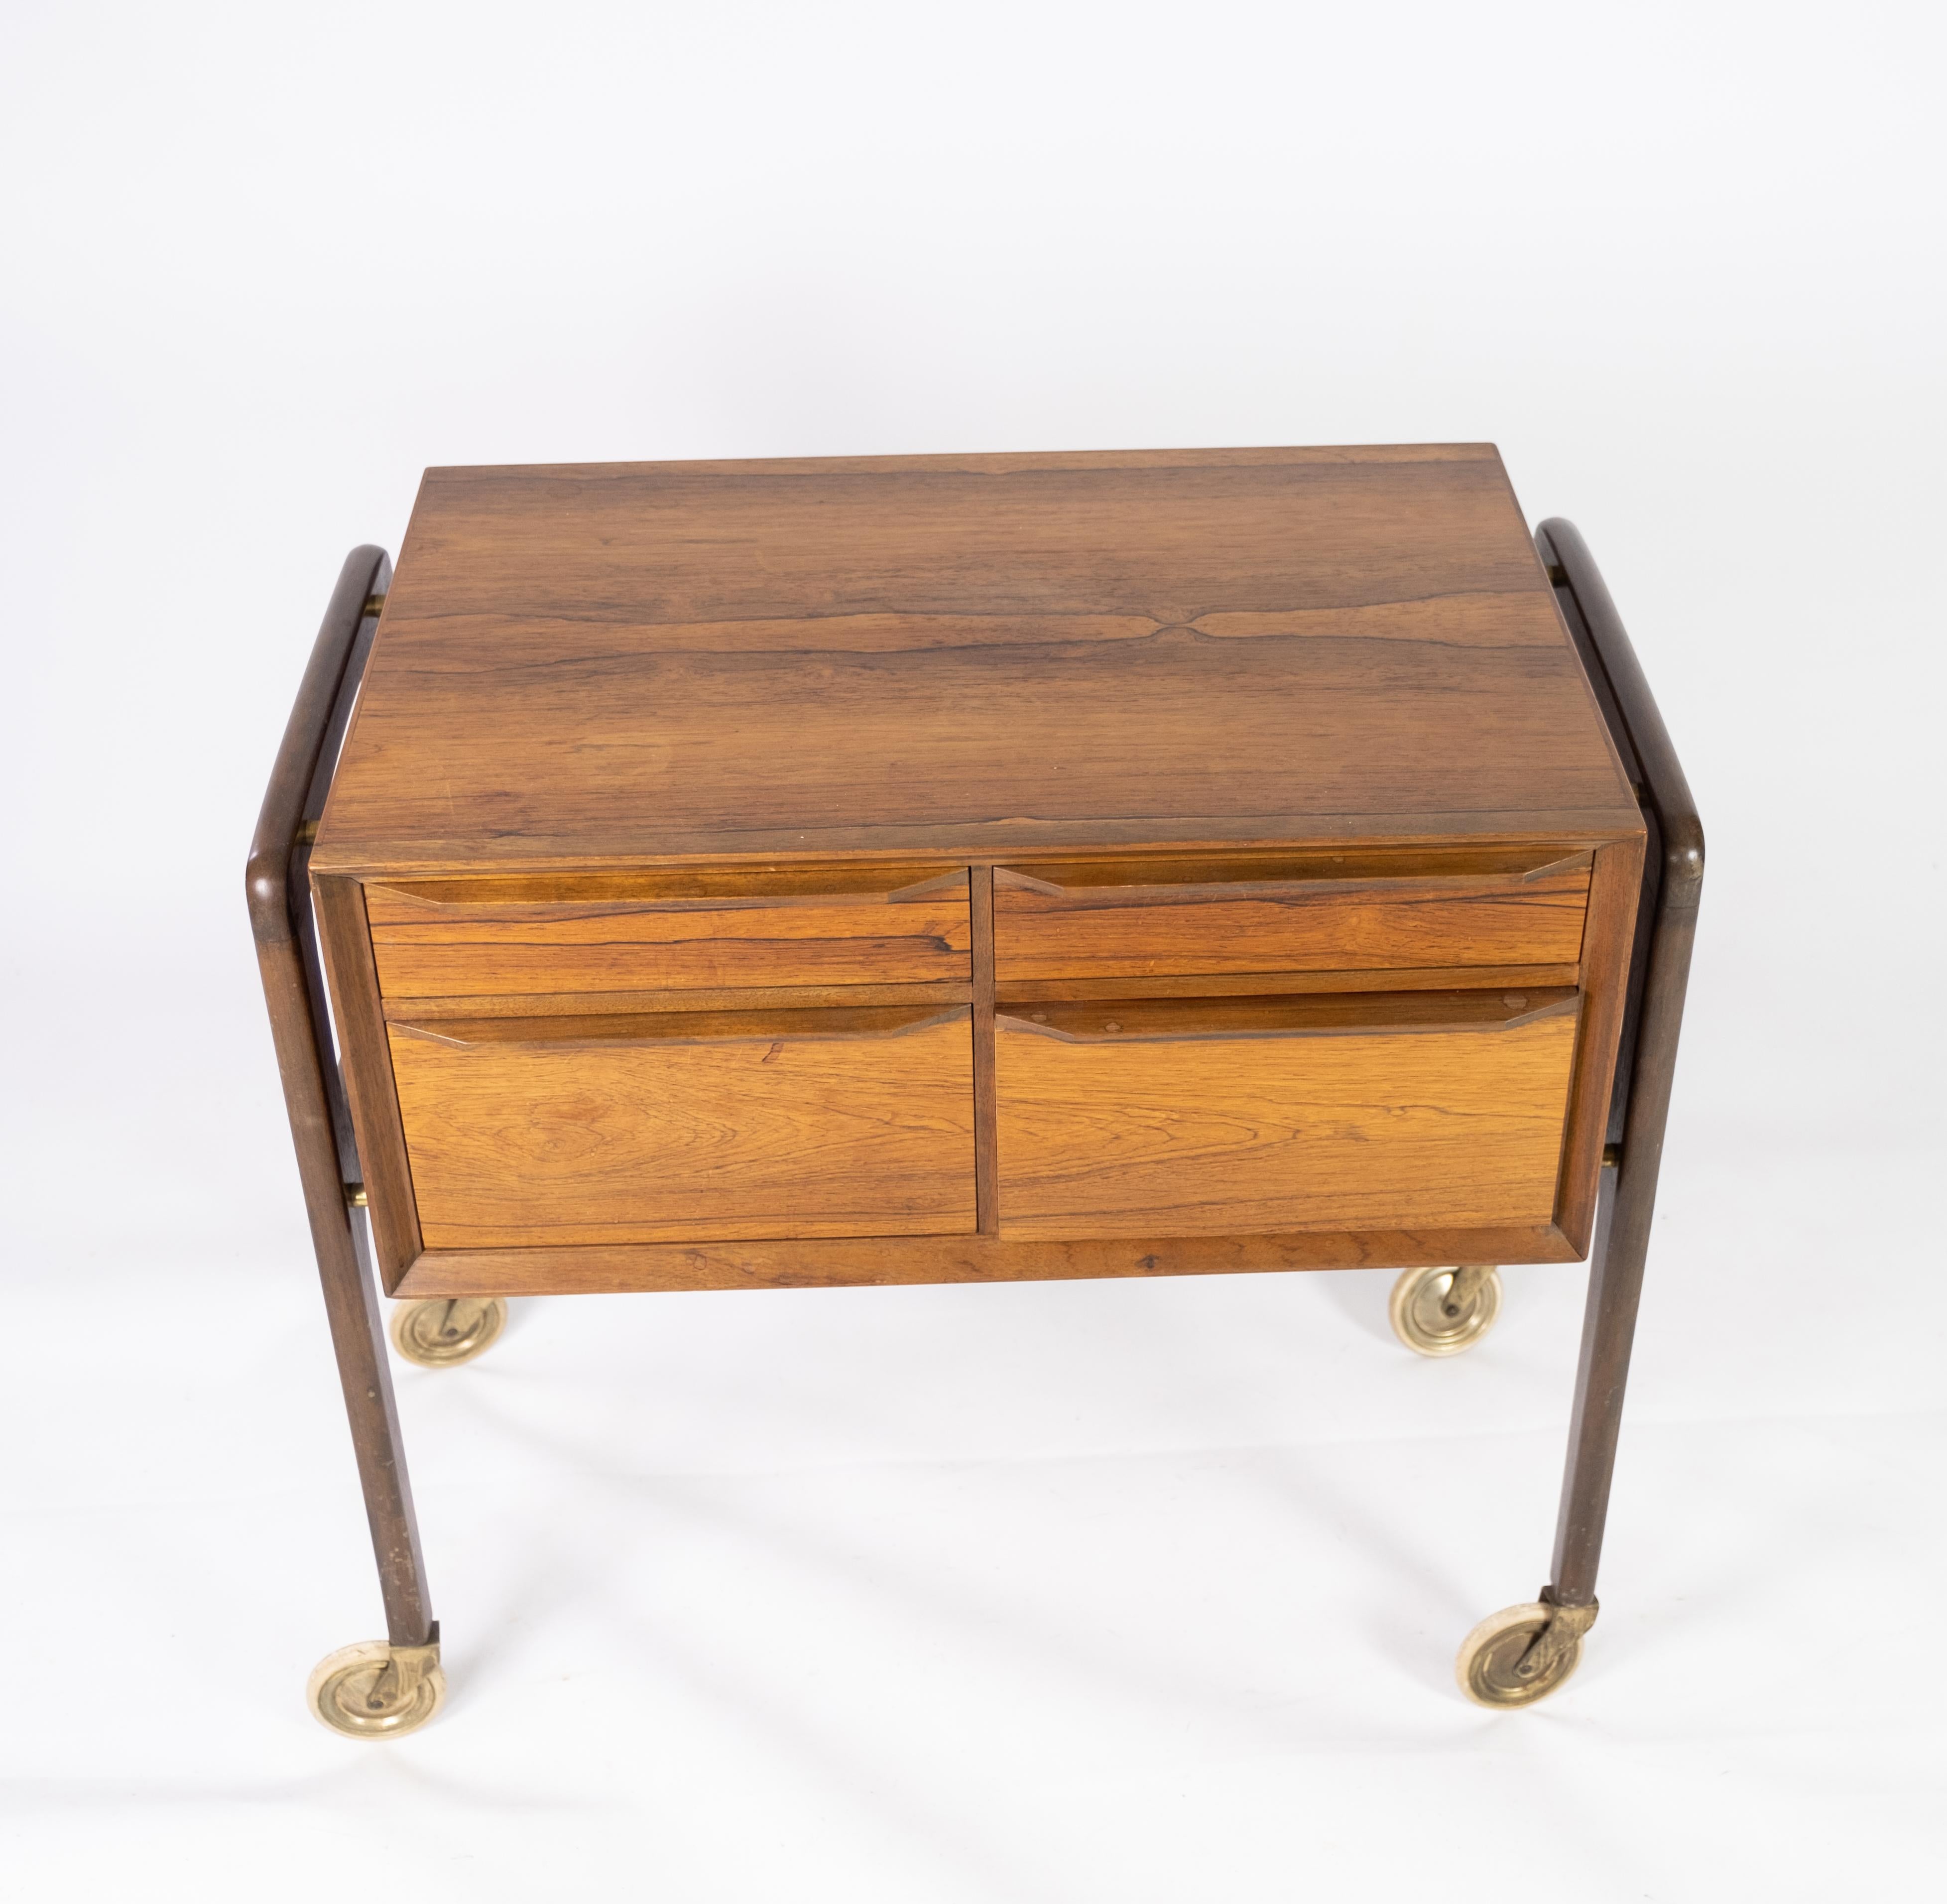 
This small chest of drawers on wheels epitomizes the elegance and functionality of Danish design from the 1960s. Crafted from luxurious rosewood, renowned for its rich color and distinctive grain patterns, this piece exudes sophistication and